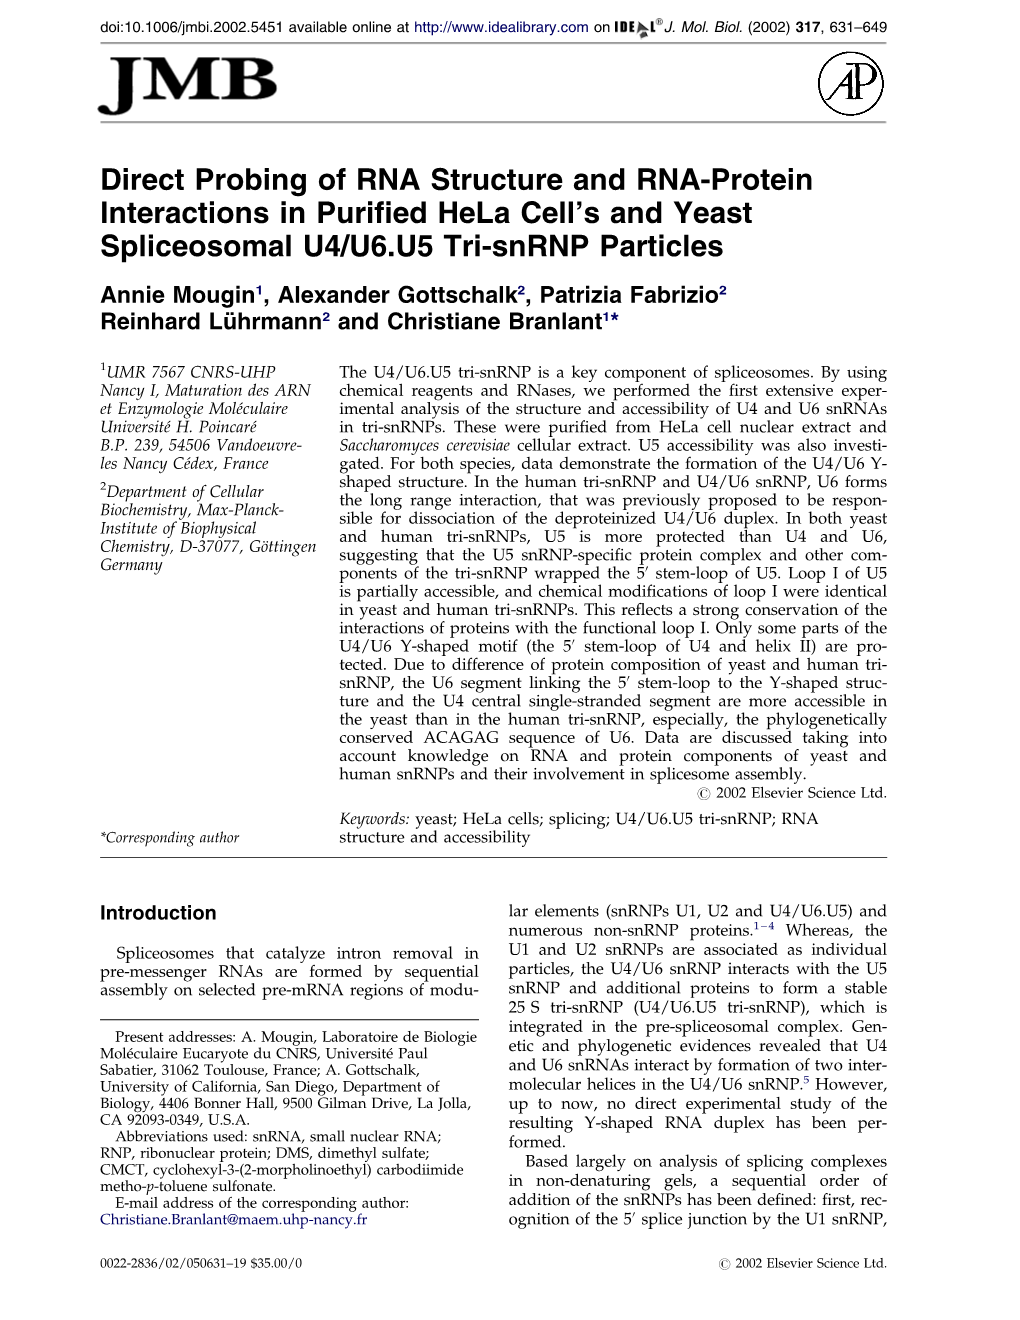 Direct Probing of RNA Structure and RNA-Protein Interactions in Purified Hela Cell&Apos;S and Yeast Spliceosomal U4/U6.U5